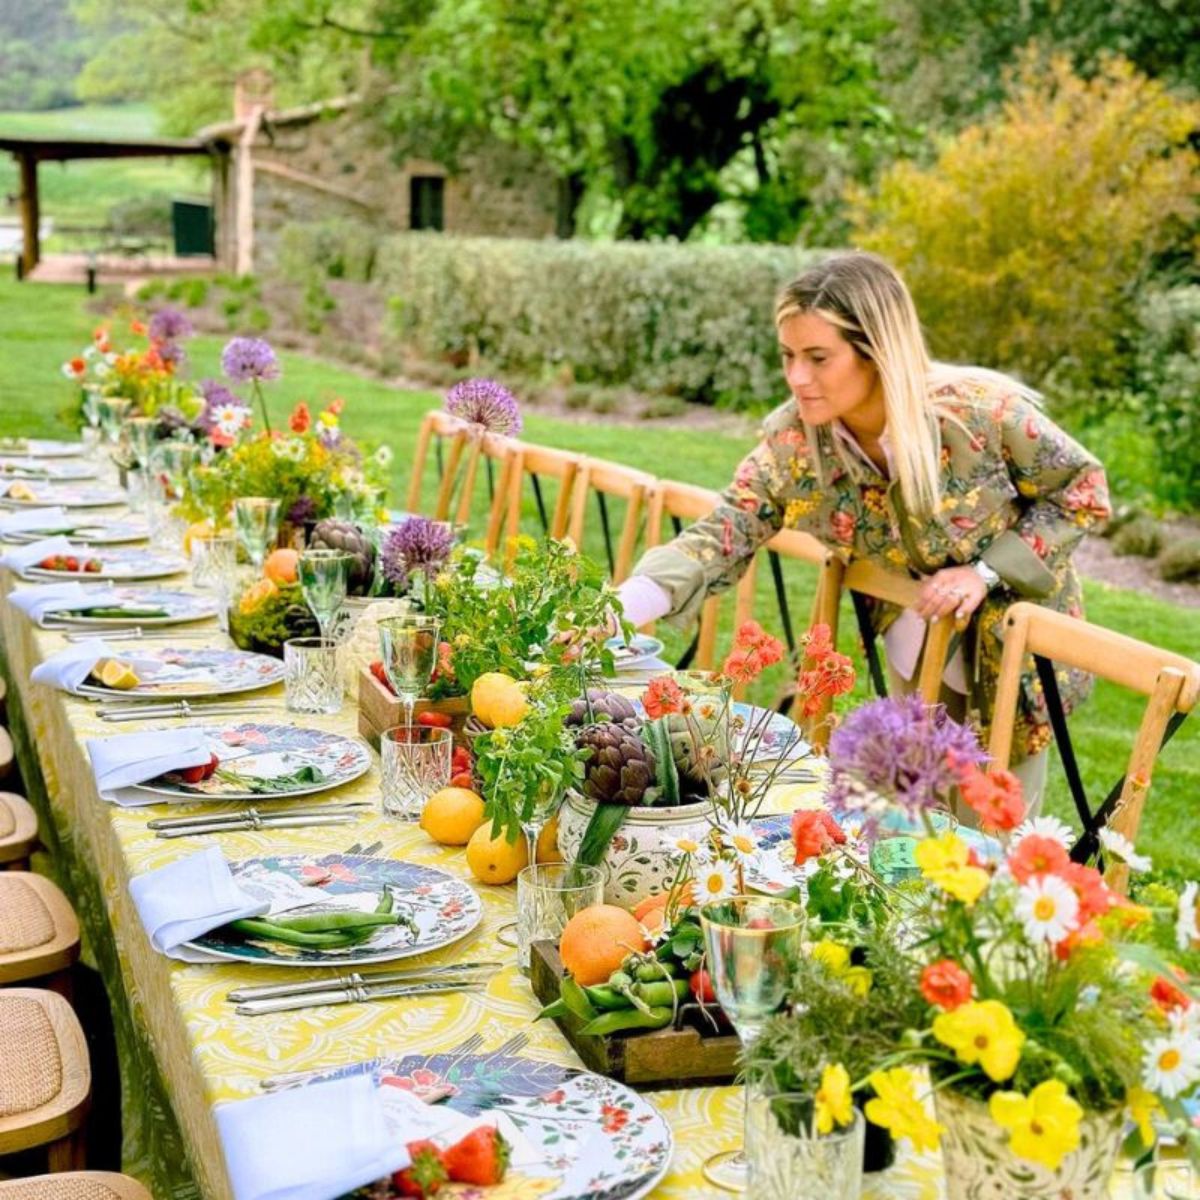 Table arranging with flower designs